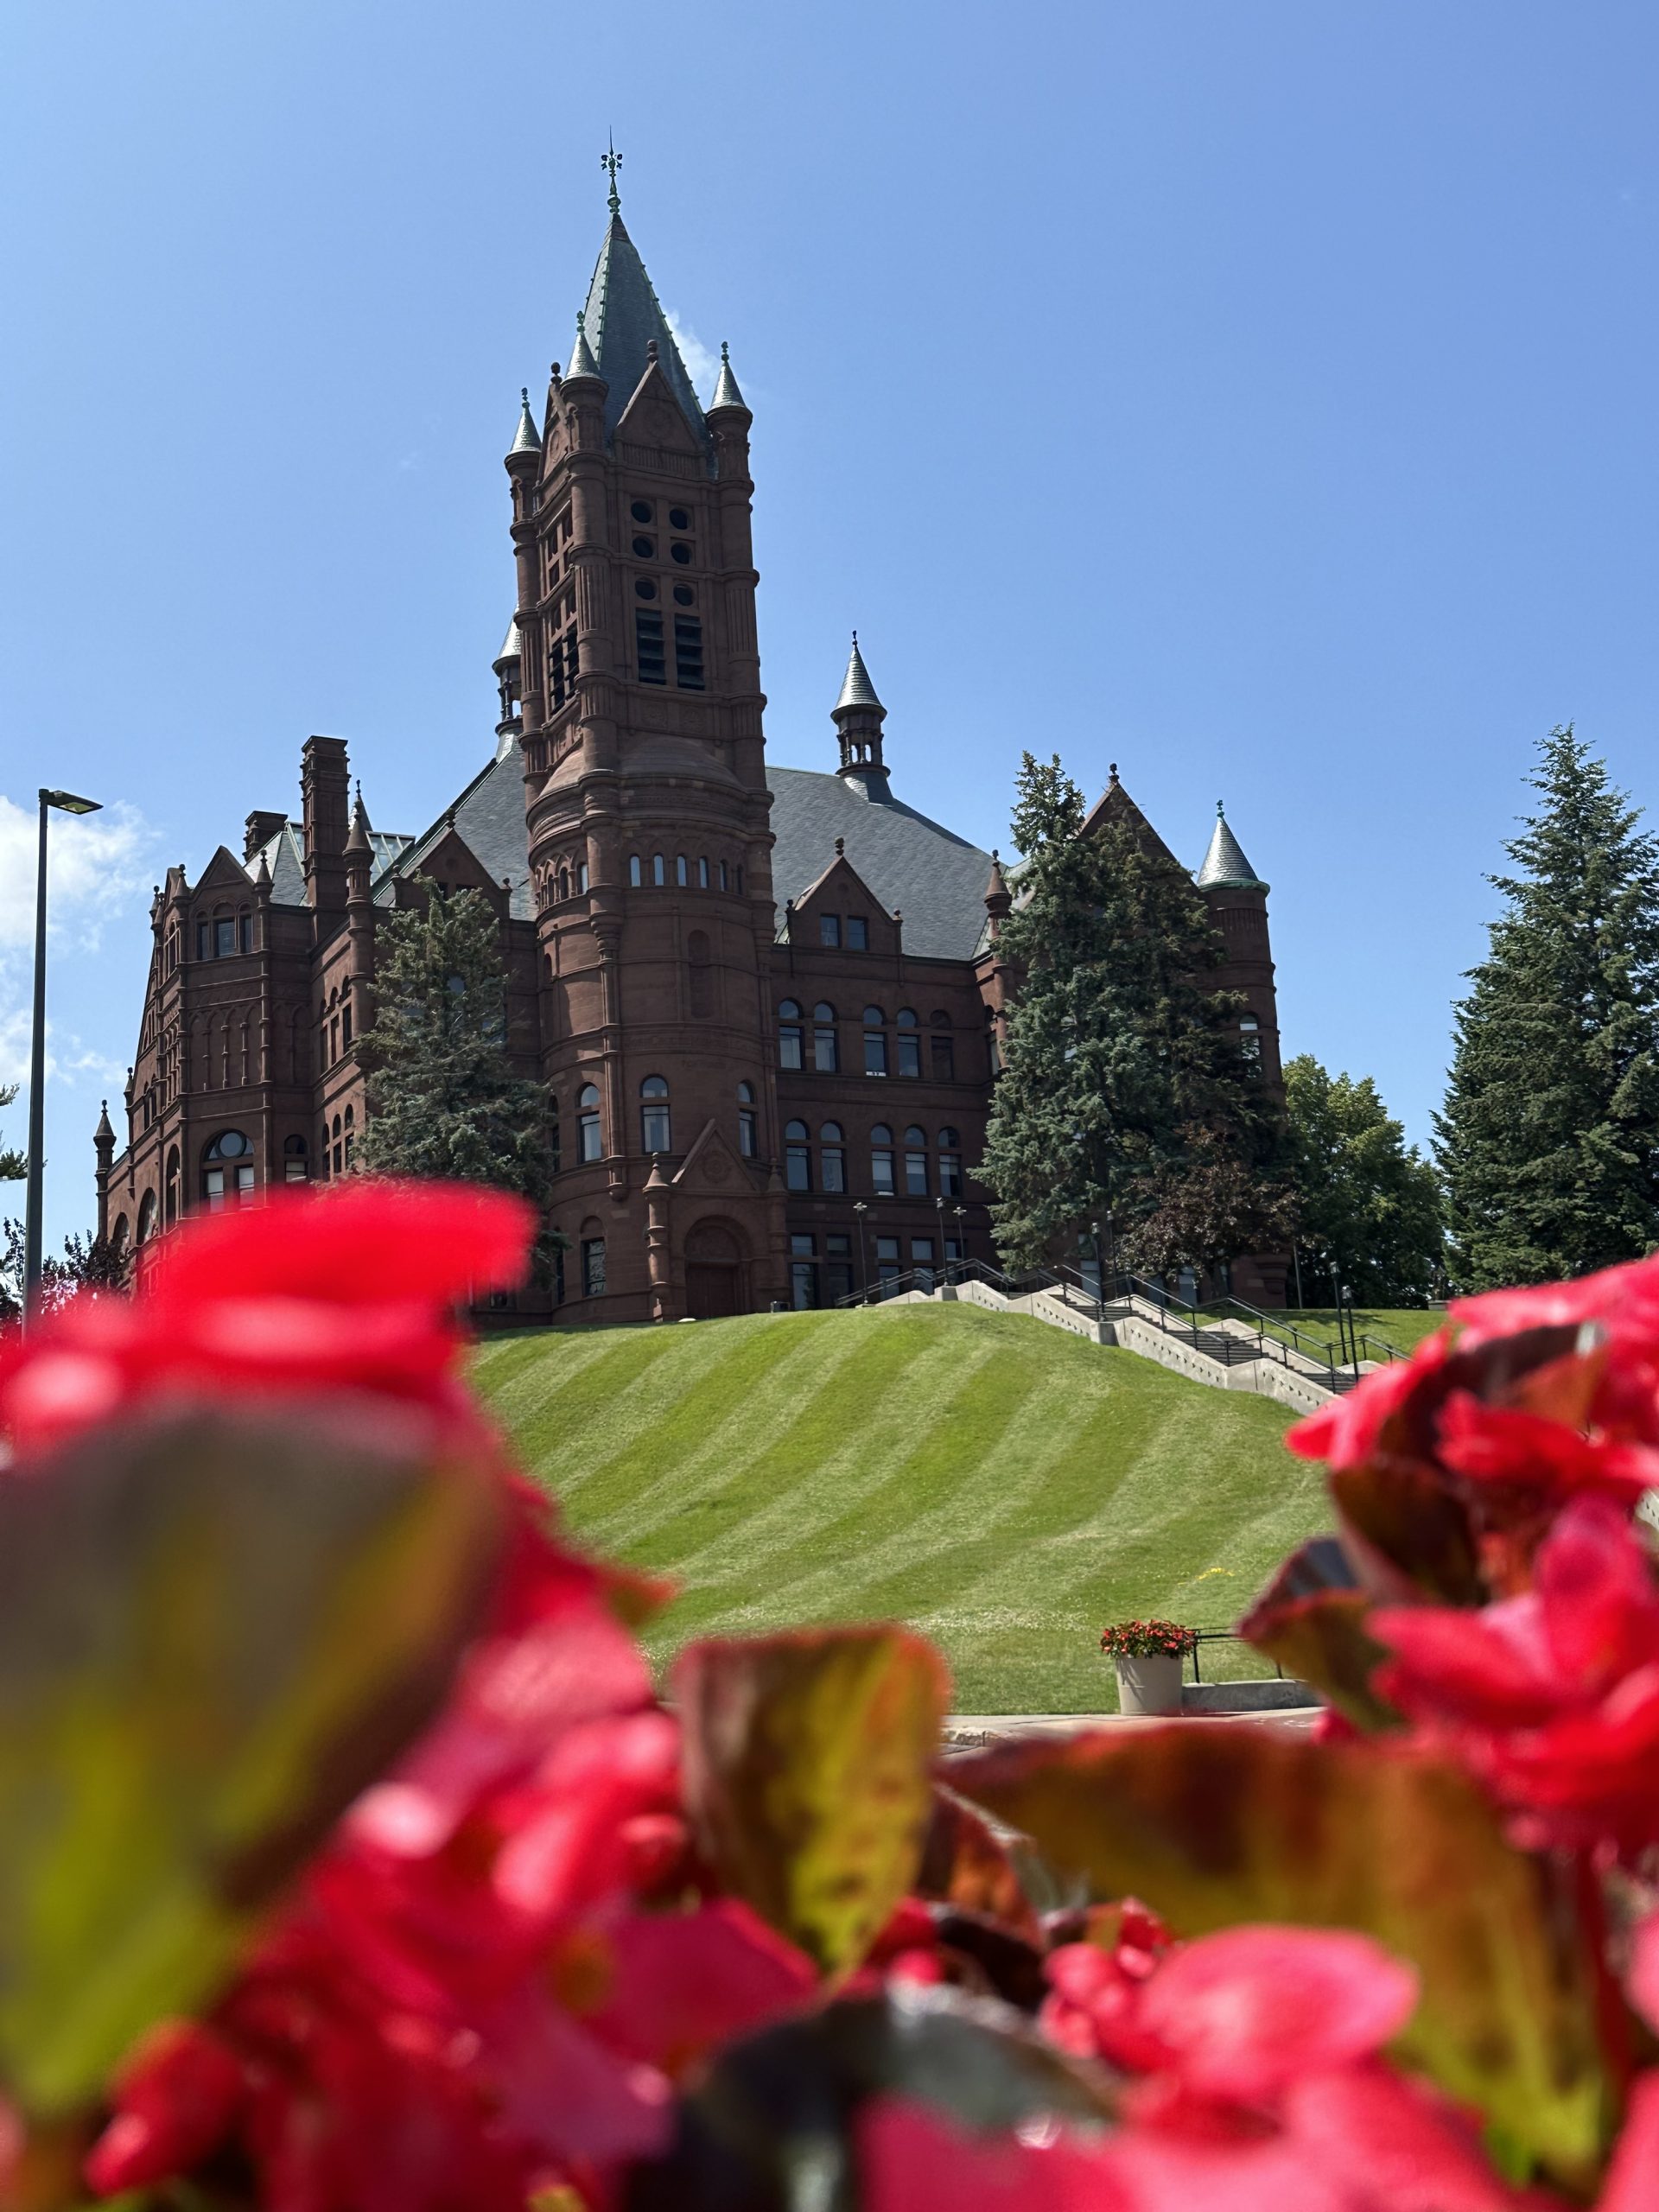 Crouse College in the background with red flowers in the foreground.